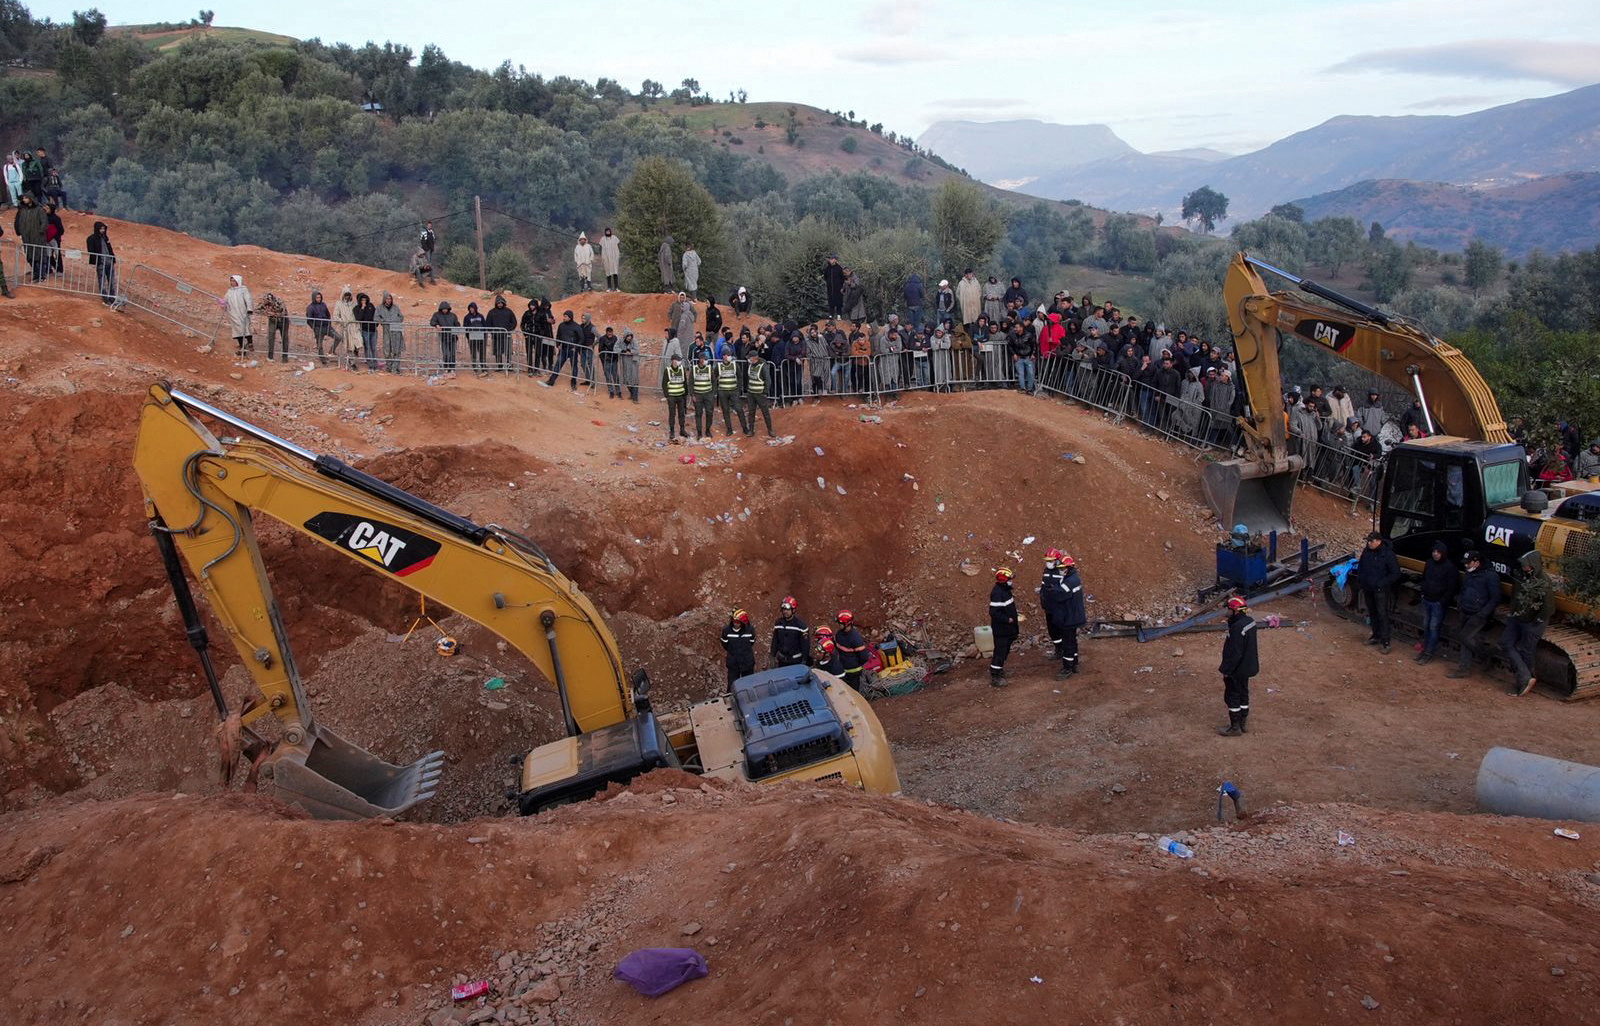 Rescuers work to reach a five-year old boy trapped in a well in the northern hill town of Chefchaouen